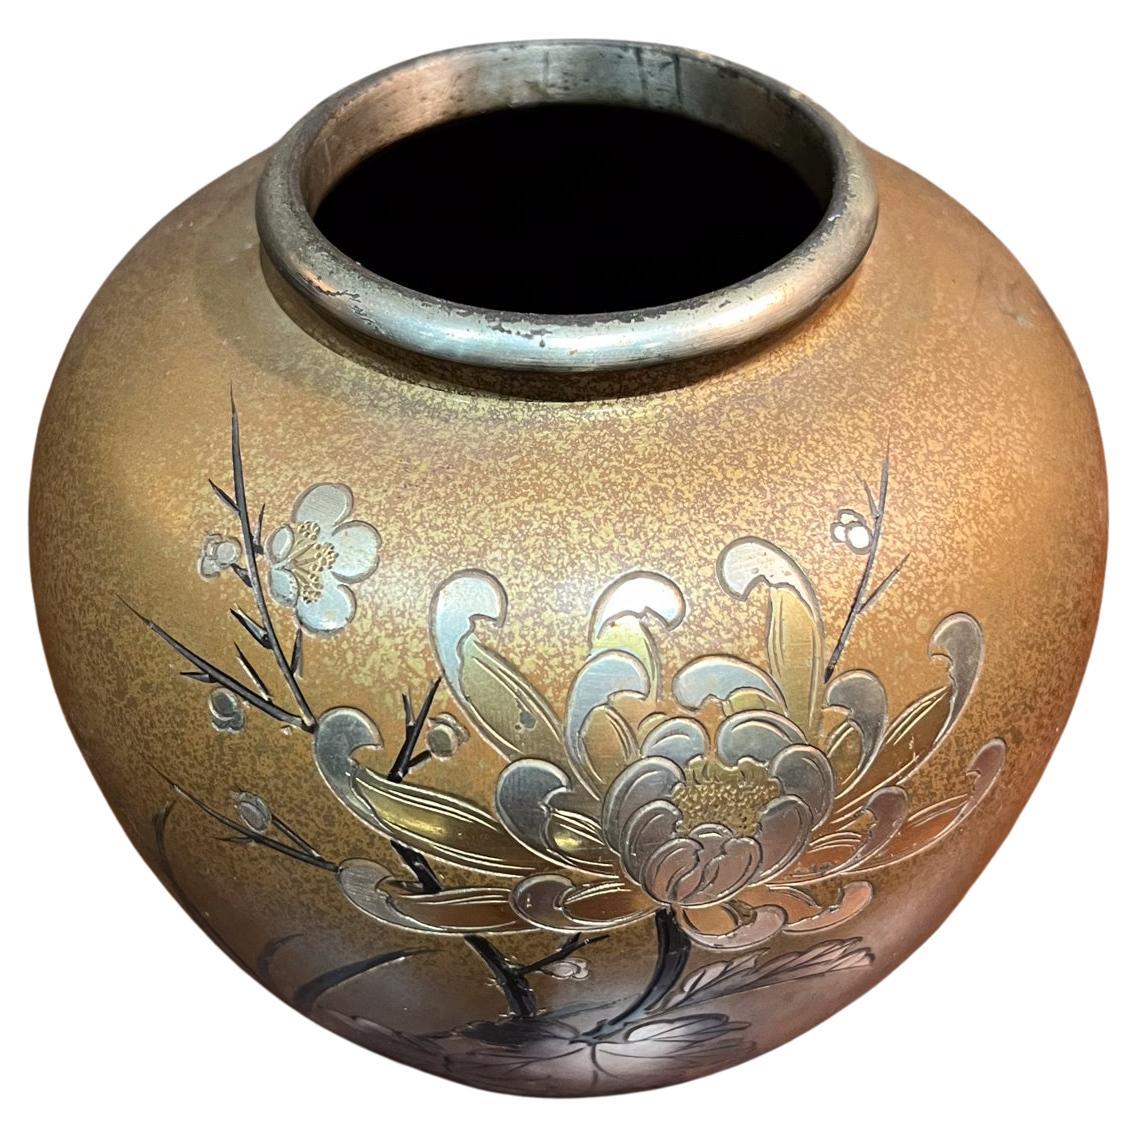 AMBIANIC presents
1950s Japanese Bronze Mixed Metal Squat Vase
Gilt patinated and mixed metal with copper inlay
Lovely floral mum design
5.75 h x 6 diameter
no signature
Preowned unrestored original vintage condition
See all images provided.